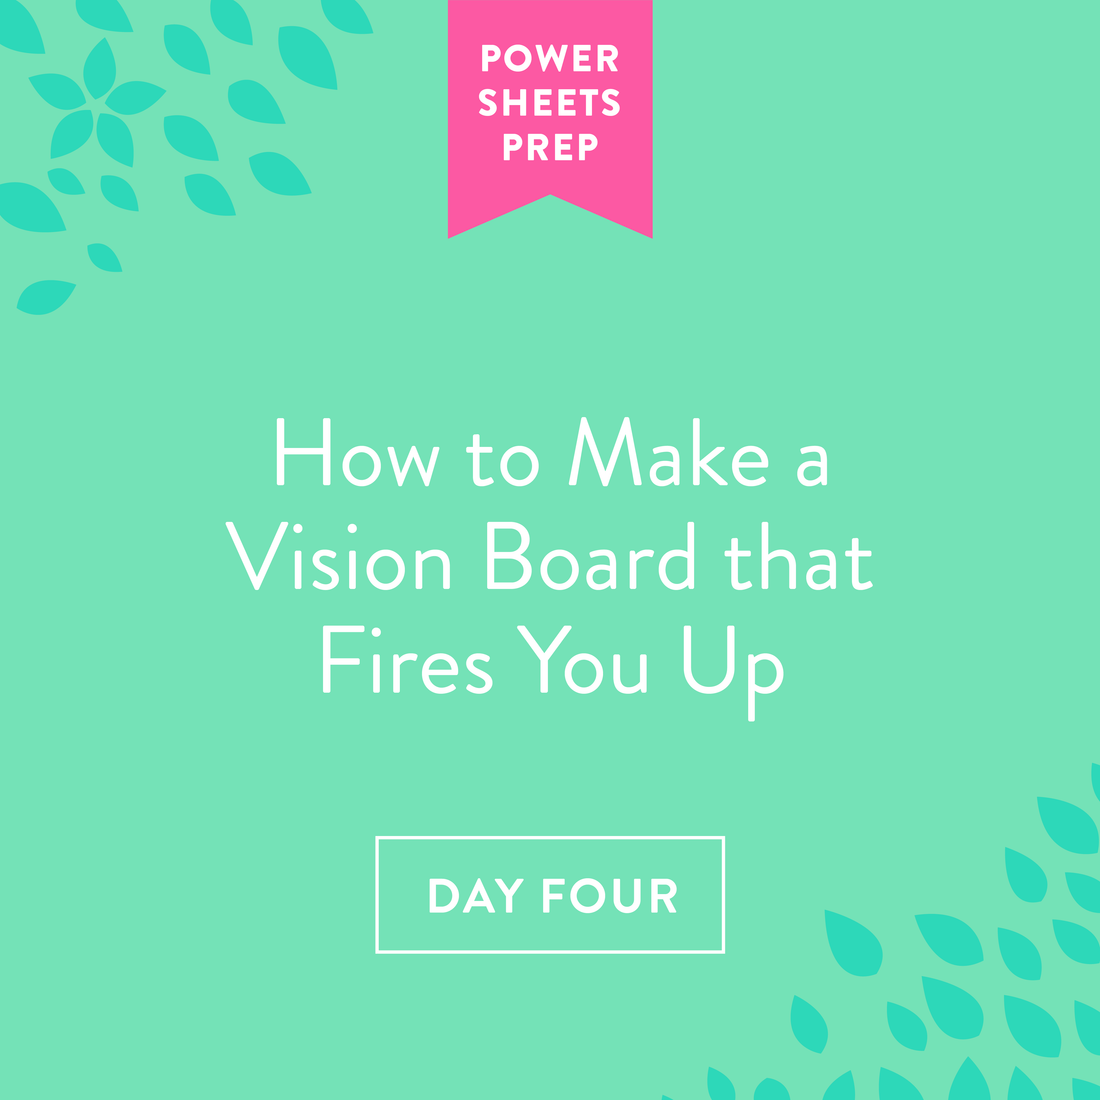 Part Four: How to Make a Vision Board That Fires You Up